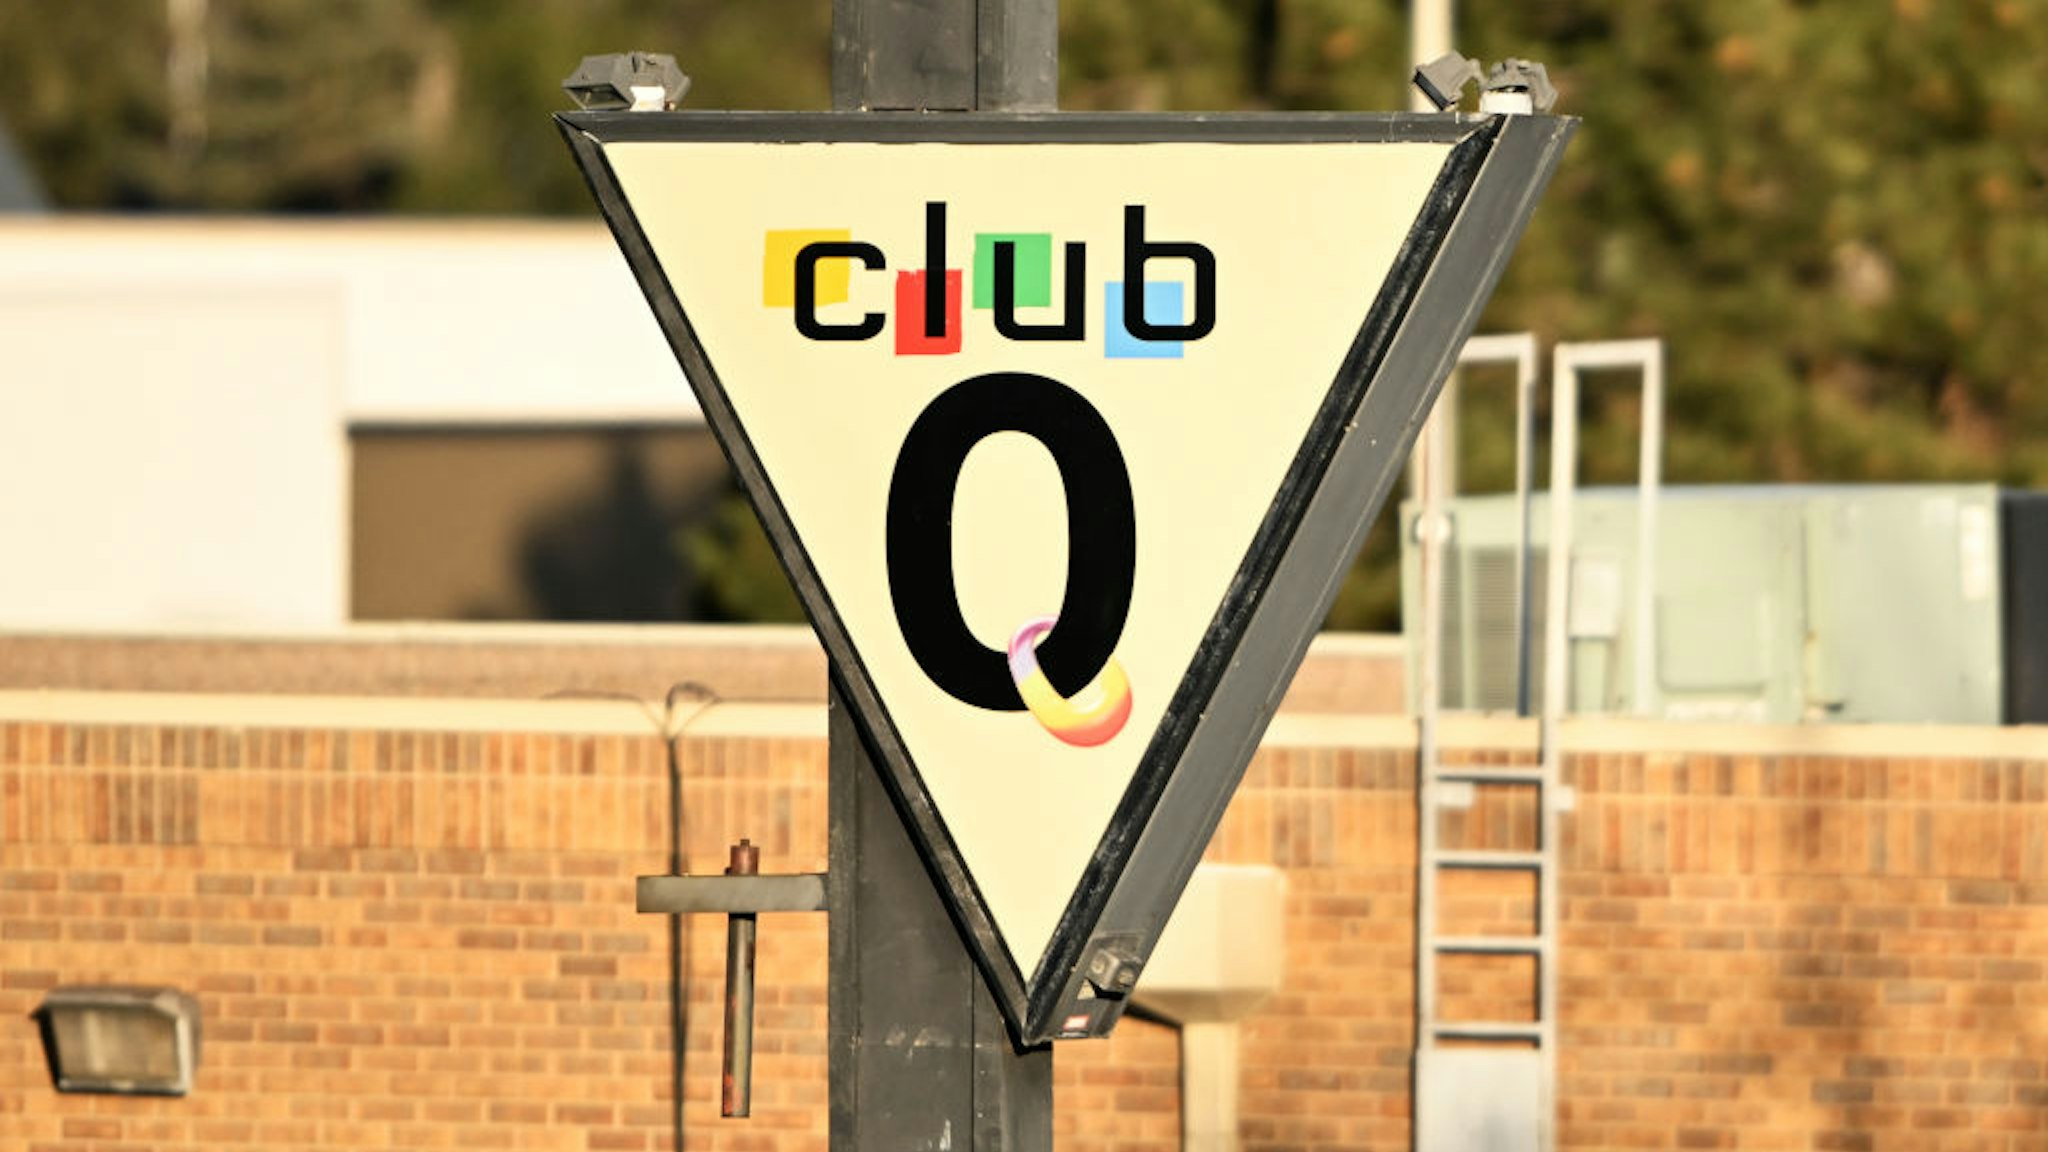 COLORADO SPRINGS, COLODARO - NOVEMBER 20: A 22-year-old gunman entered Club Q, an LGBTQ nightclub, killing at least five people and injuring 25 others on November 20, 2022 in Colorado Springs, Colorado. (Photo by RJ Sangosti/MediaNews Group/The Denver Post via Getty Images)